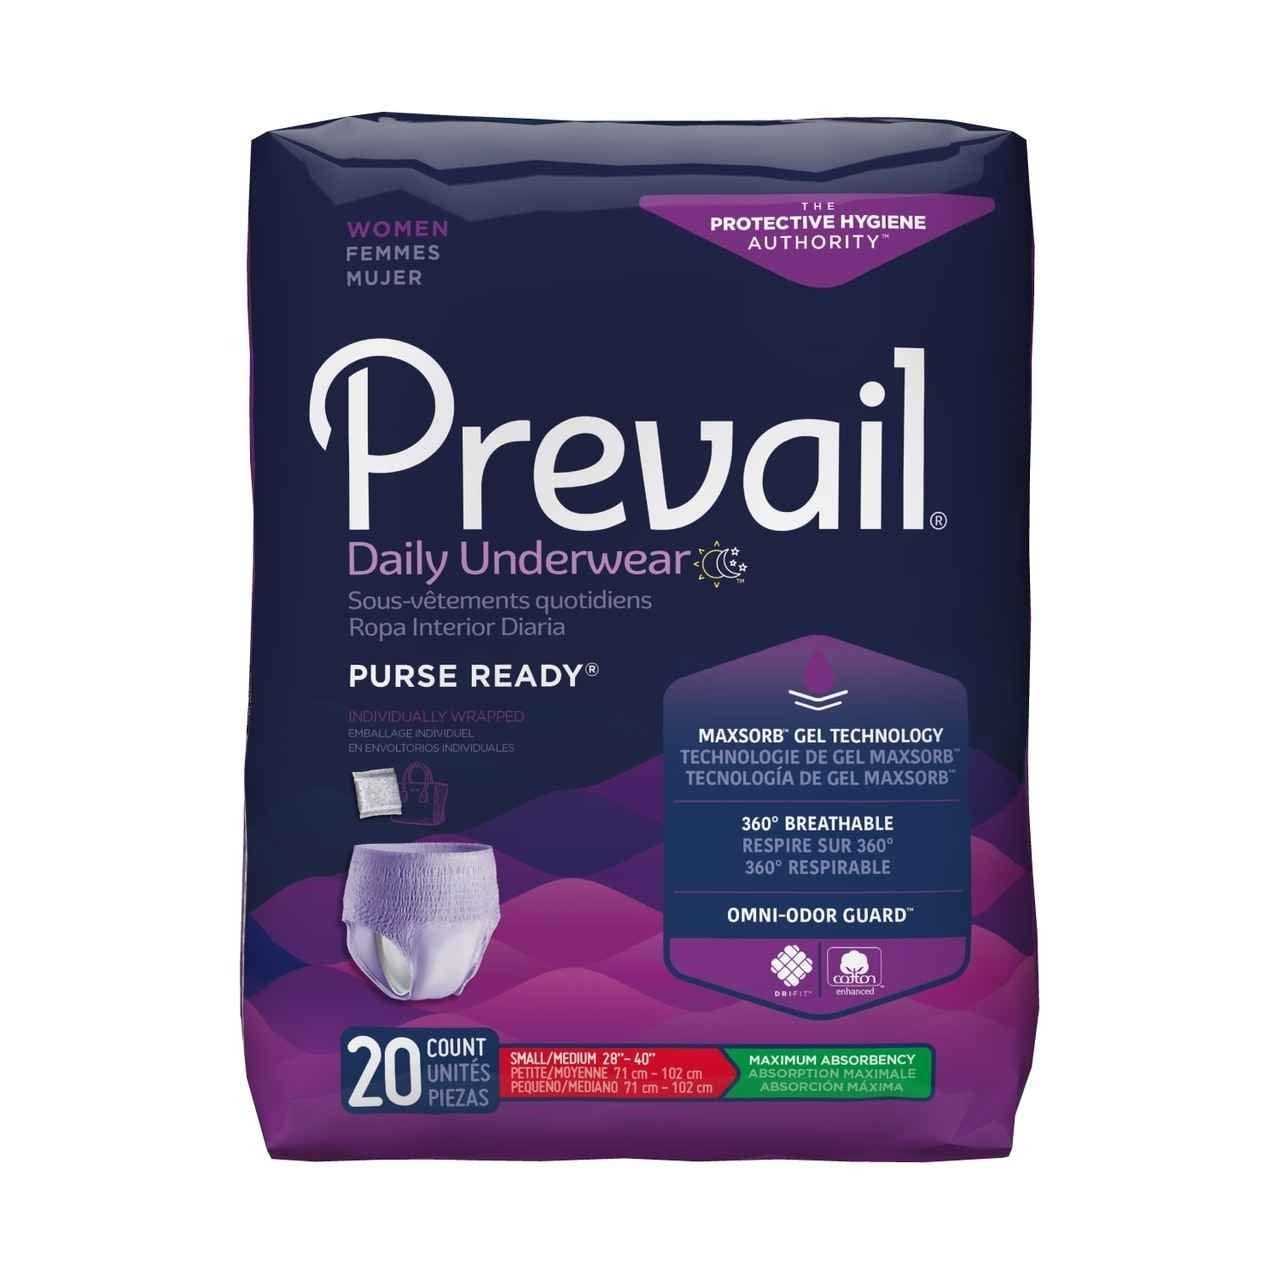 Image of Prevail PurseReady Max Absorbency Underwear for Women